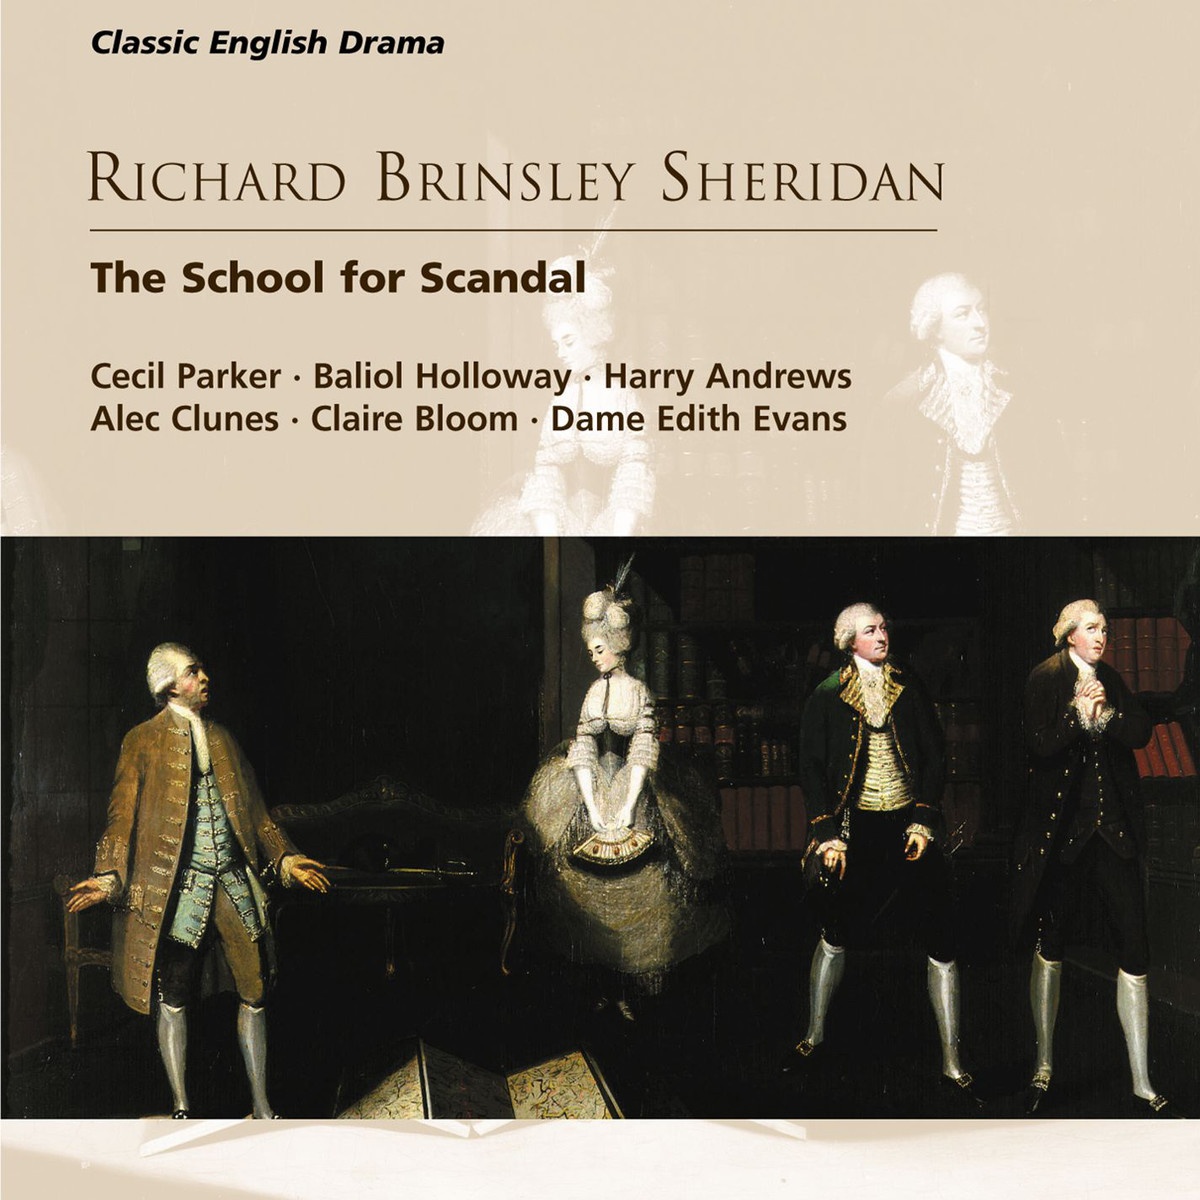 The School for Scandal - A comedy in five acts, Act I, Scene 1 (At Lady Sneerwell's): Lady Sneerwell, I kiss your hand (Crabtree